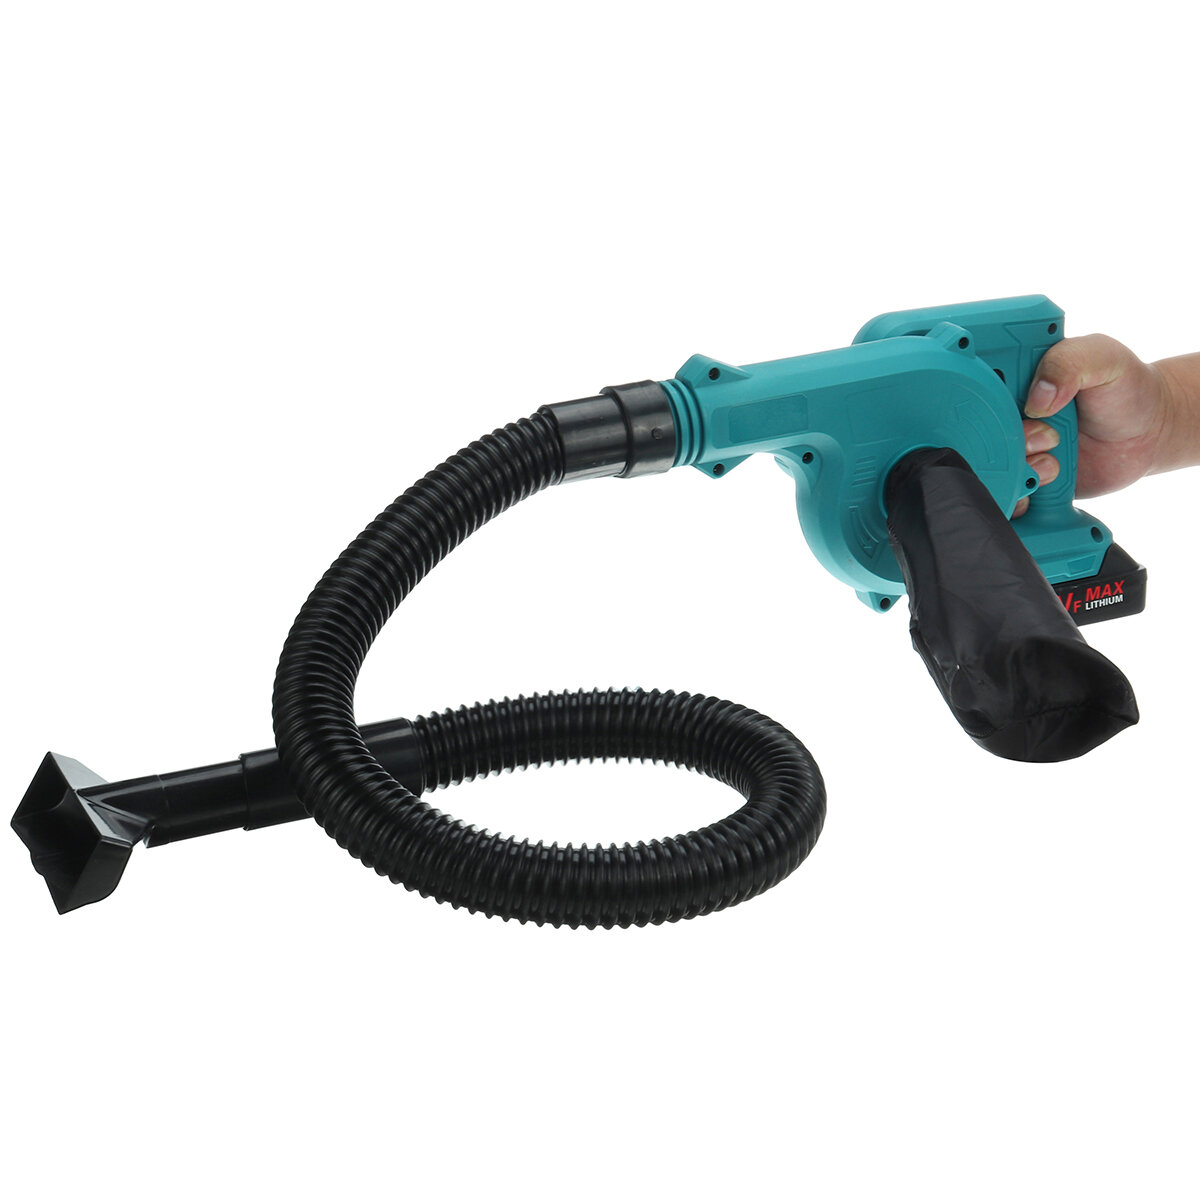 2 IN 1 Cordless Electric Air Blower & Suction Handheld Leaf Computer Dust Collector Cleaner Power Tool For Makiita 18V B